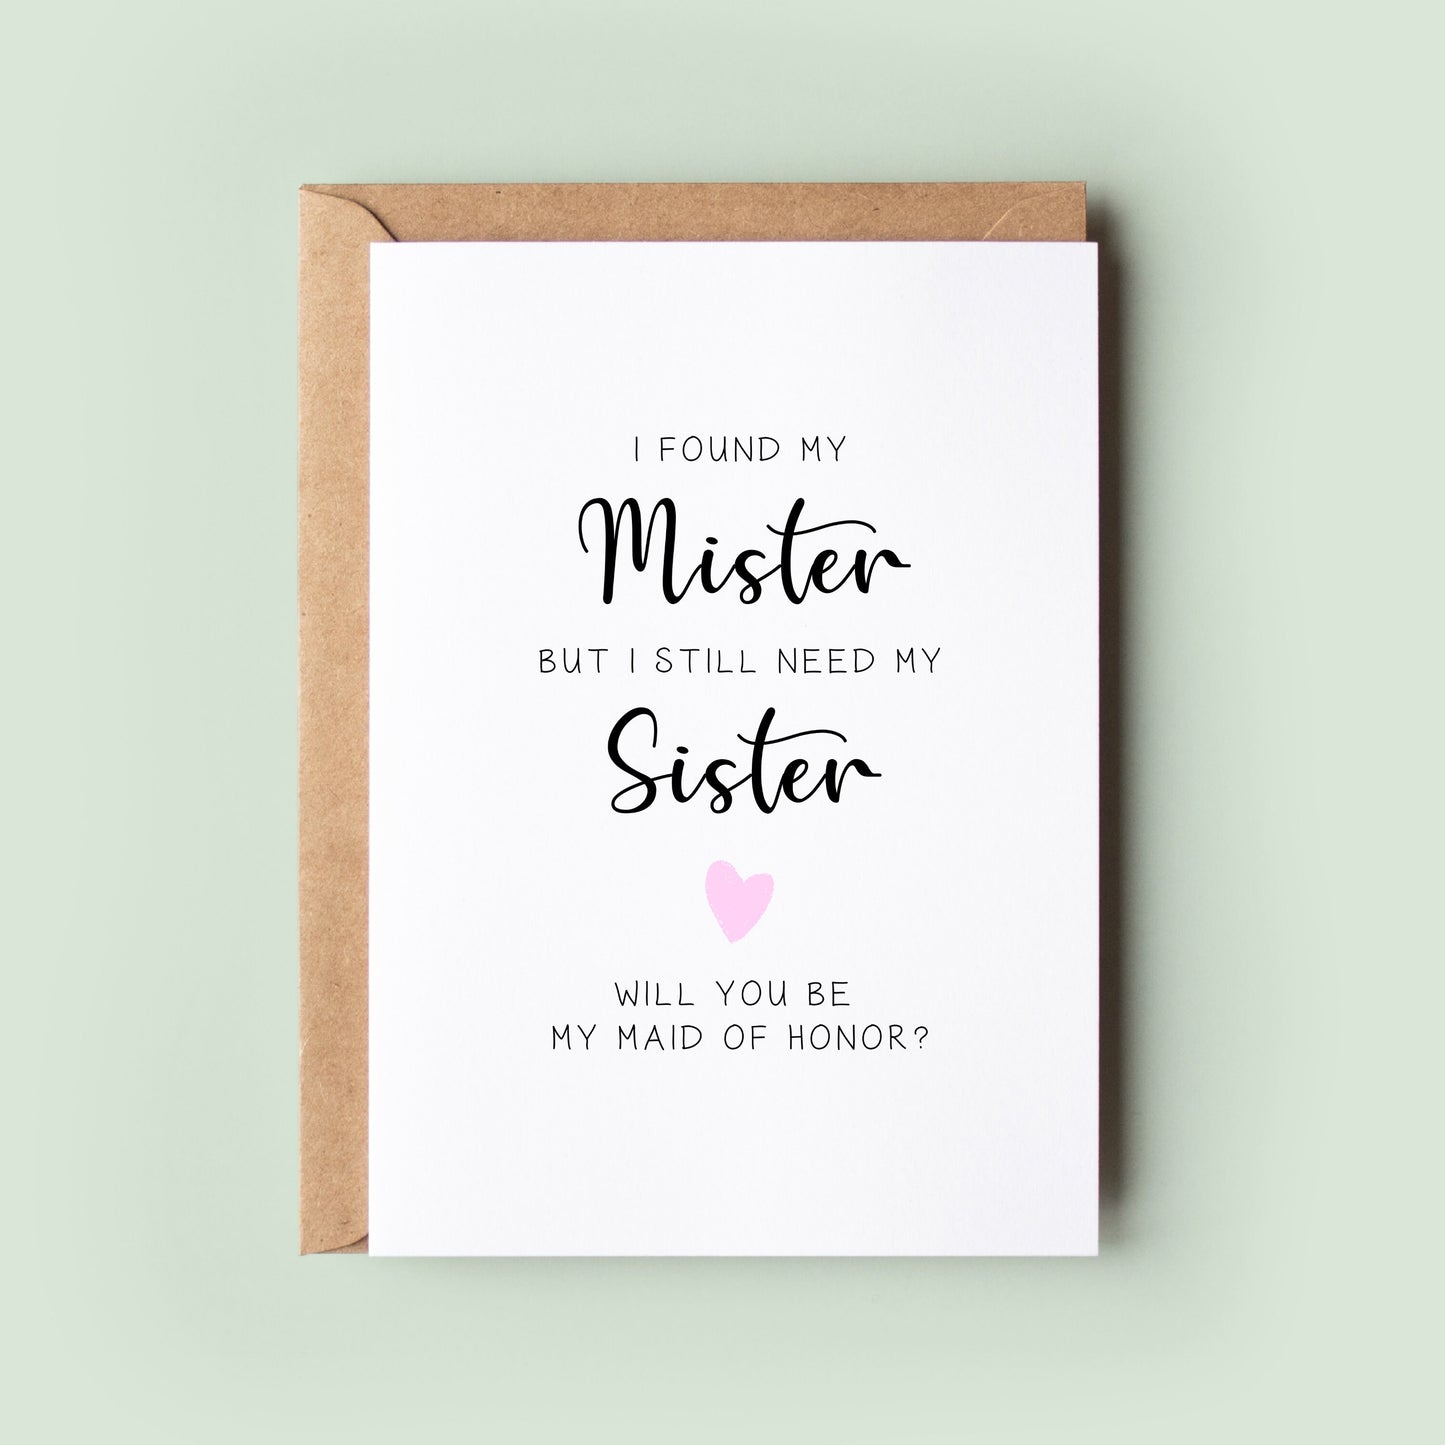 Found My Mister Still Need My Sister Maid of Honor Card, Will You Be My Maid of Honor, Maid of Honor Proposal, Maid of Honor Box and Gift